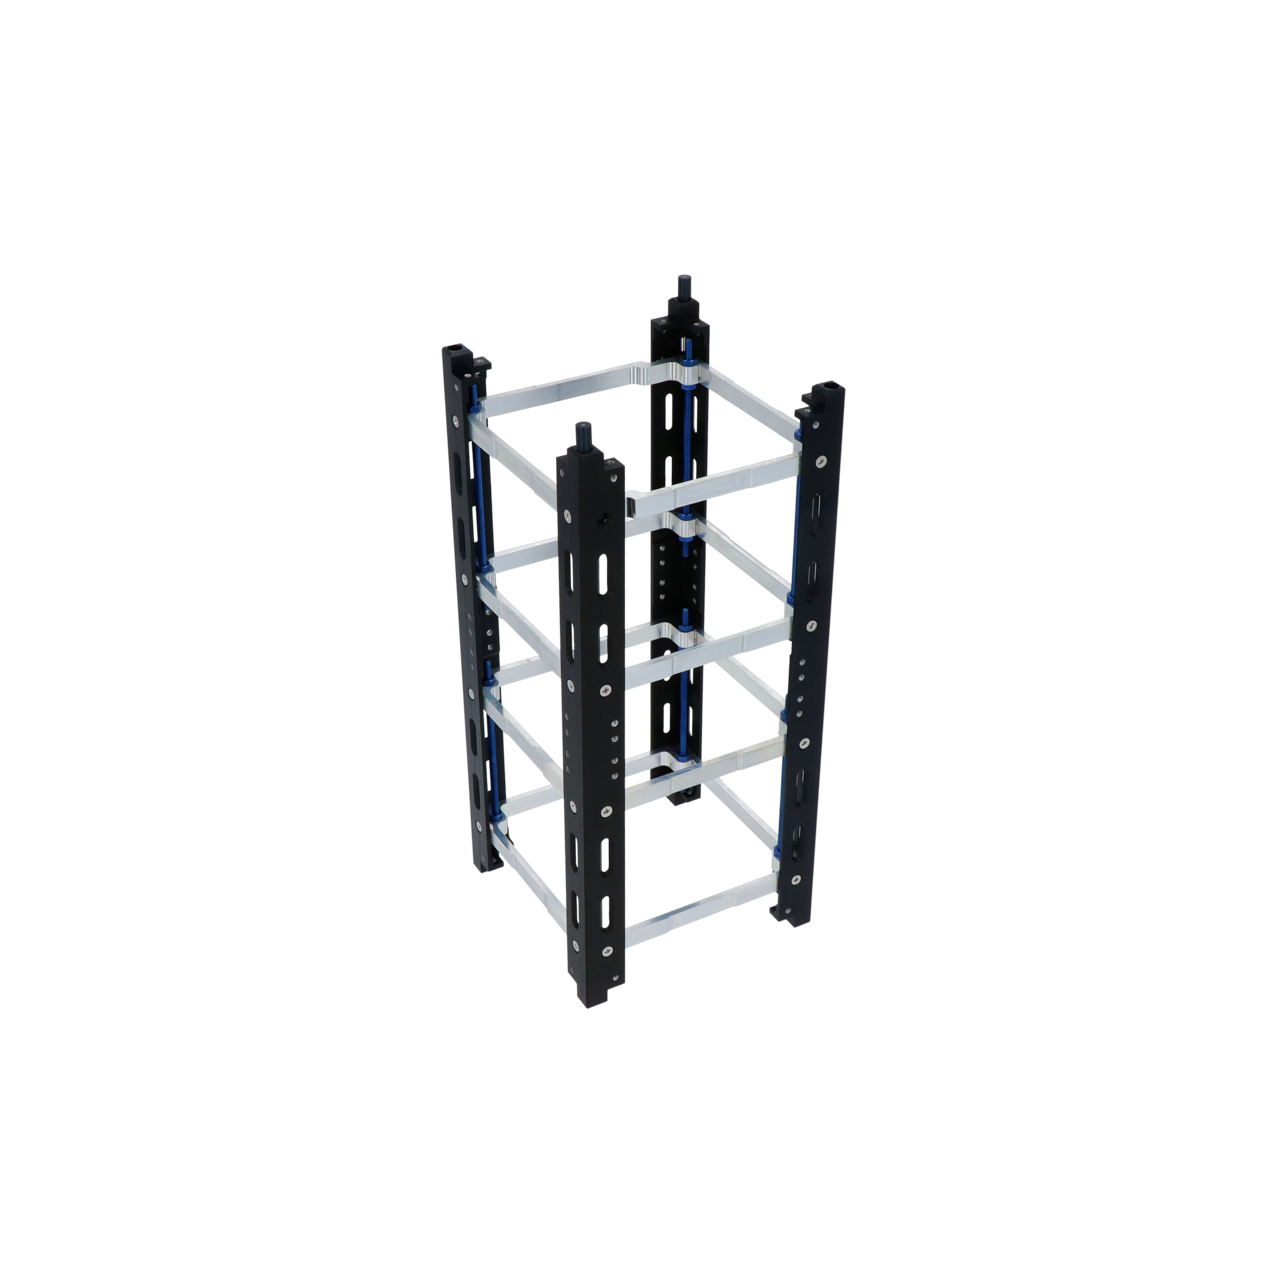 Structures - product image 3